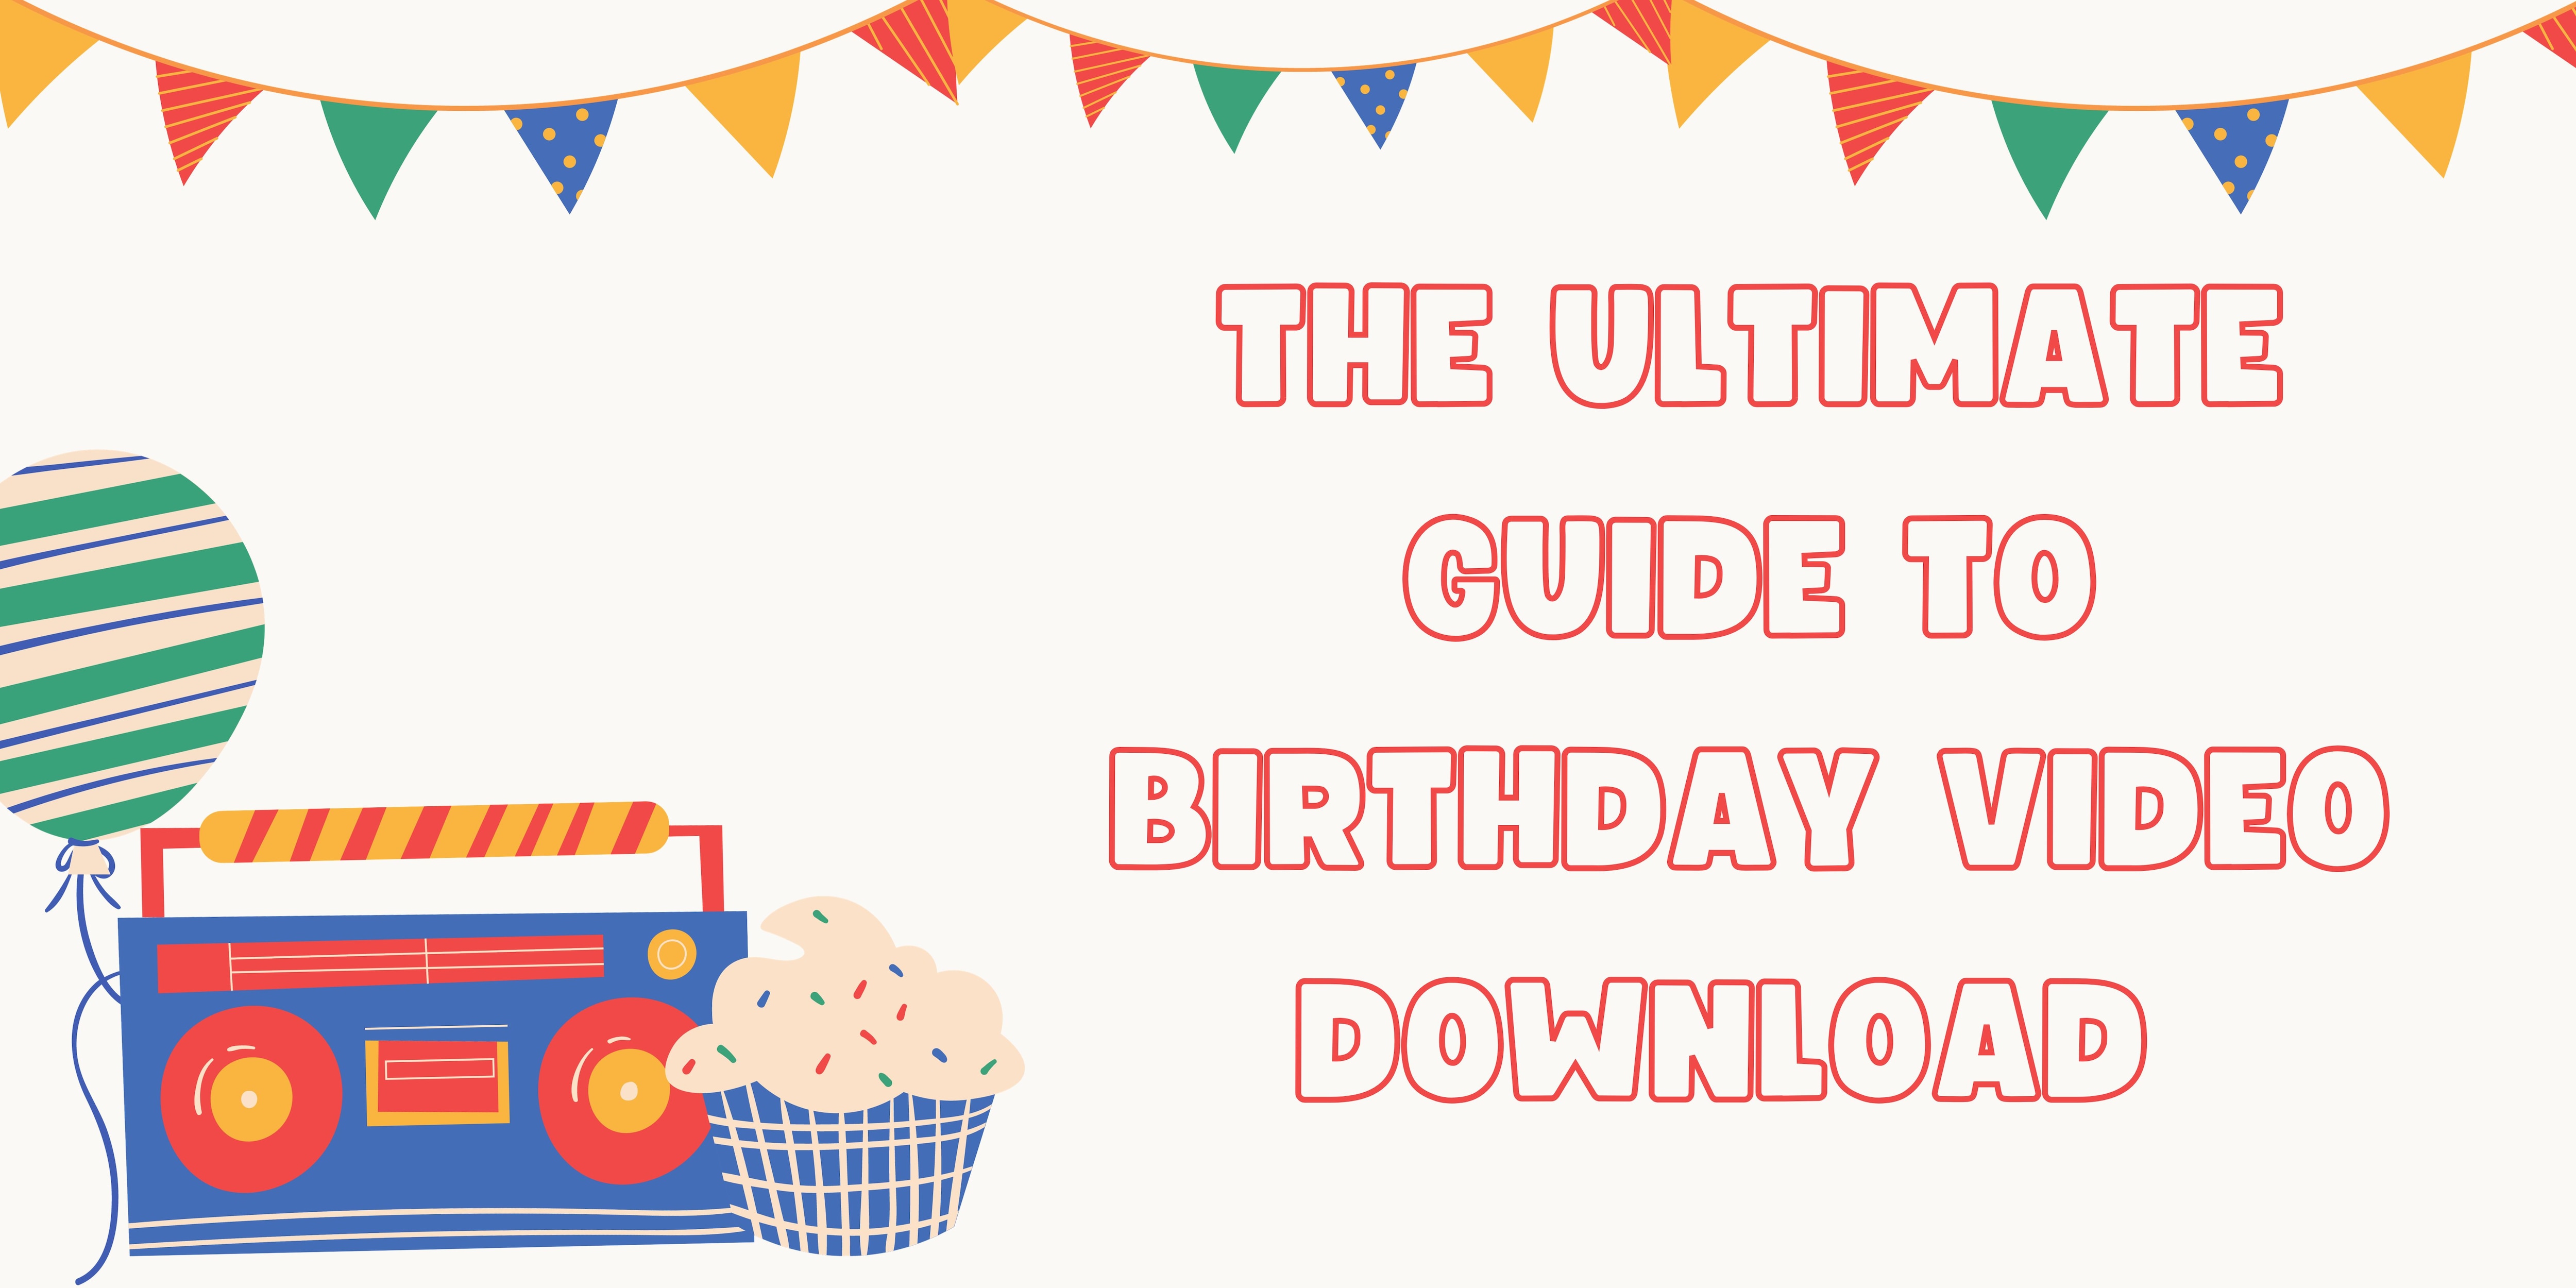 The Ultimate Guide to Birthday Video Downloads